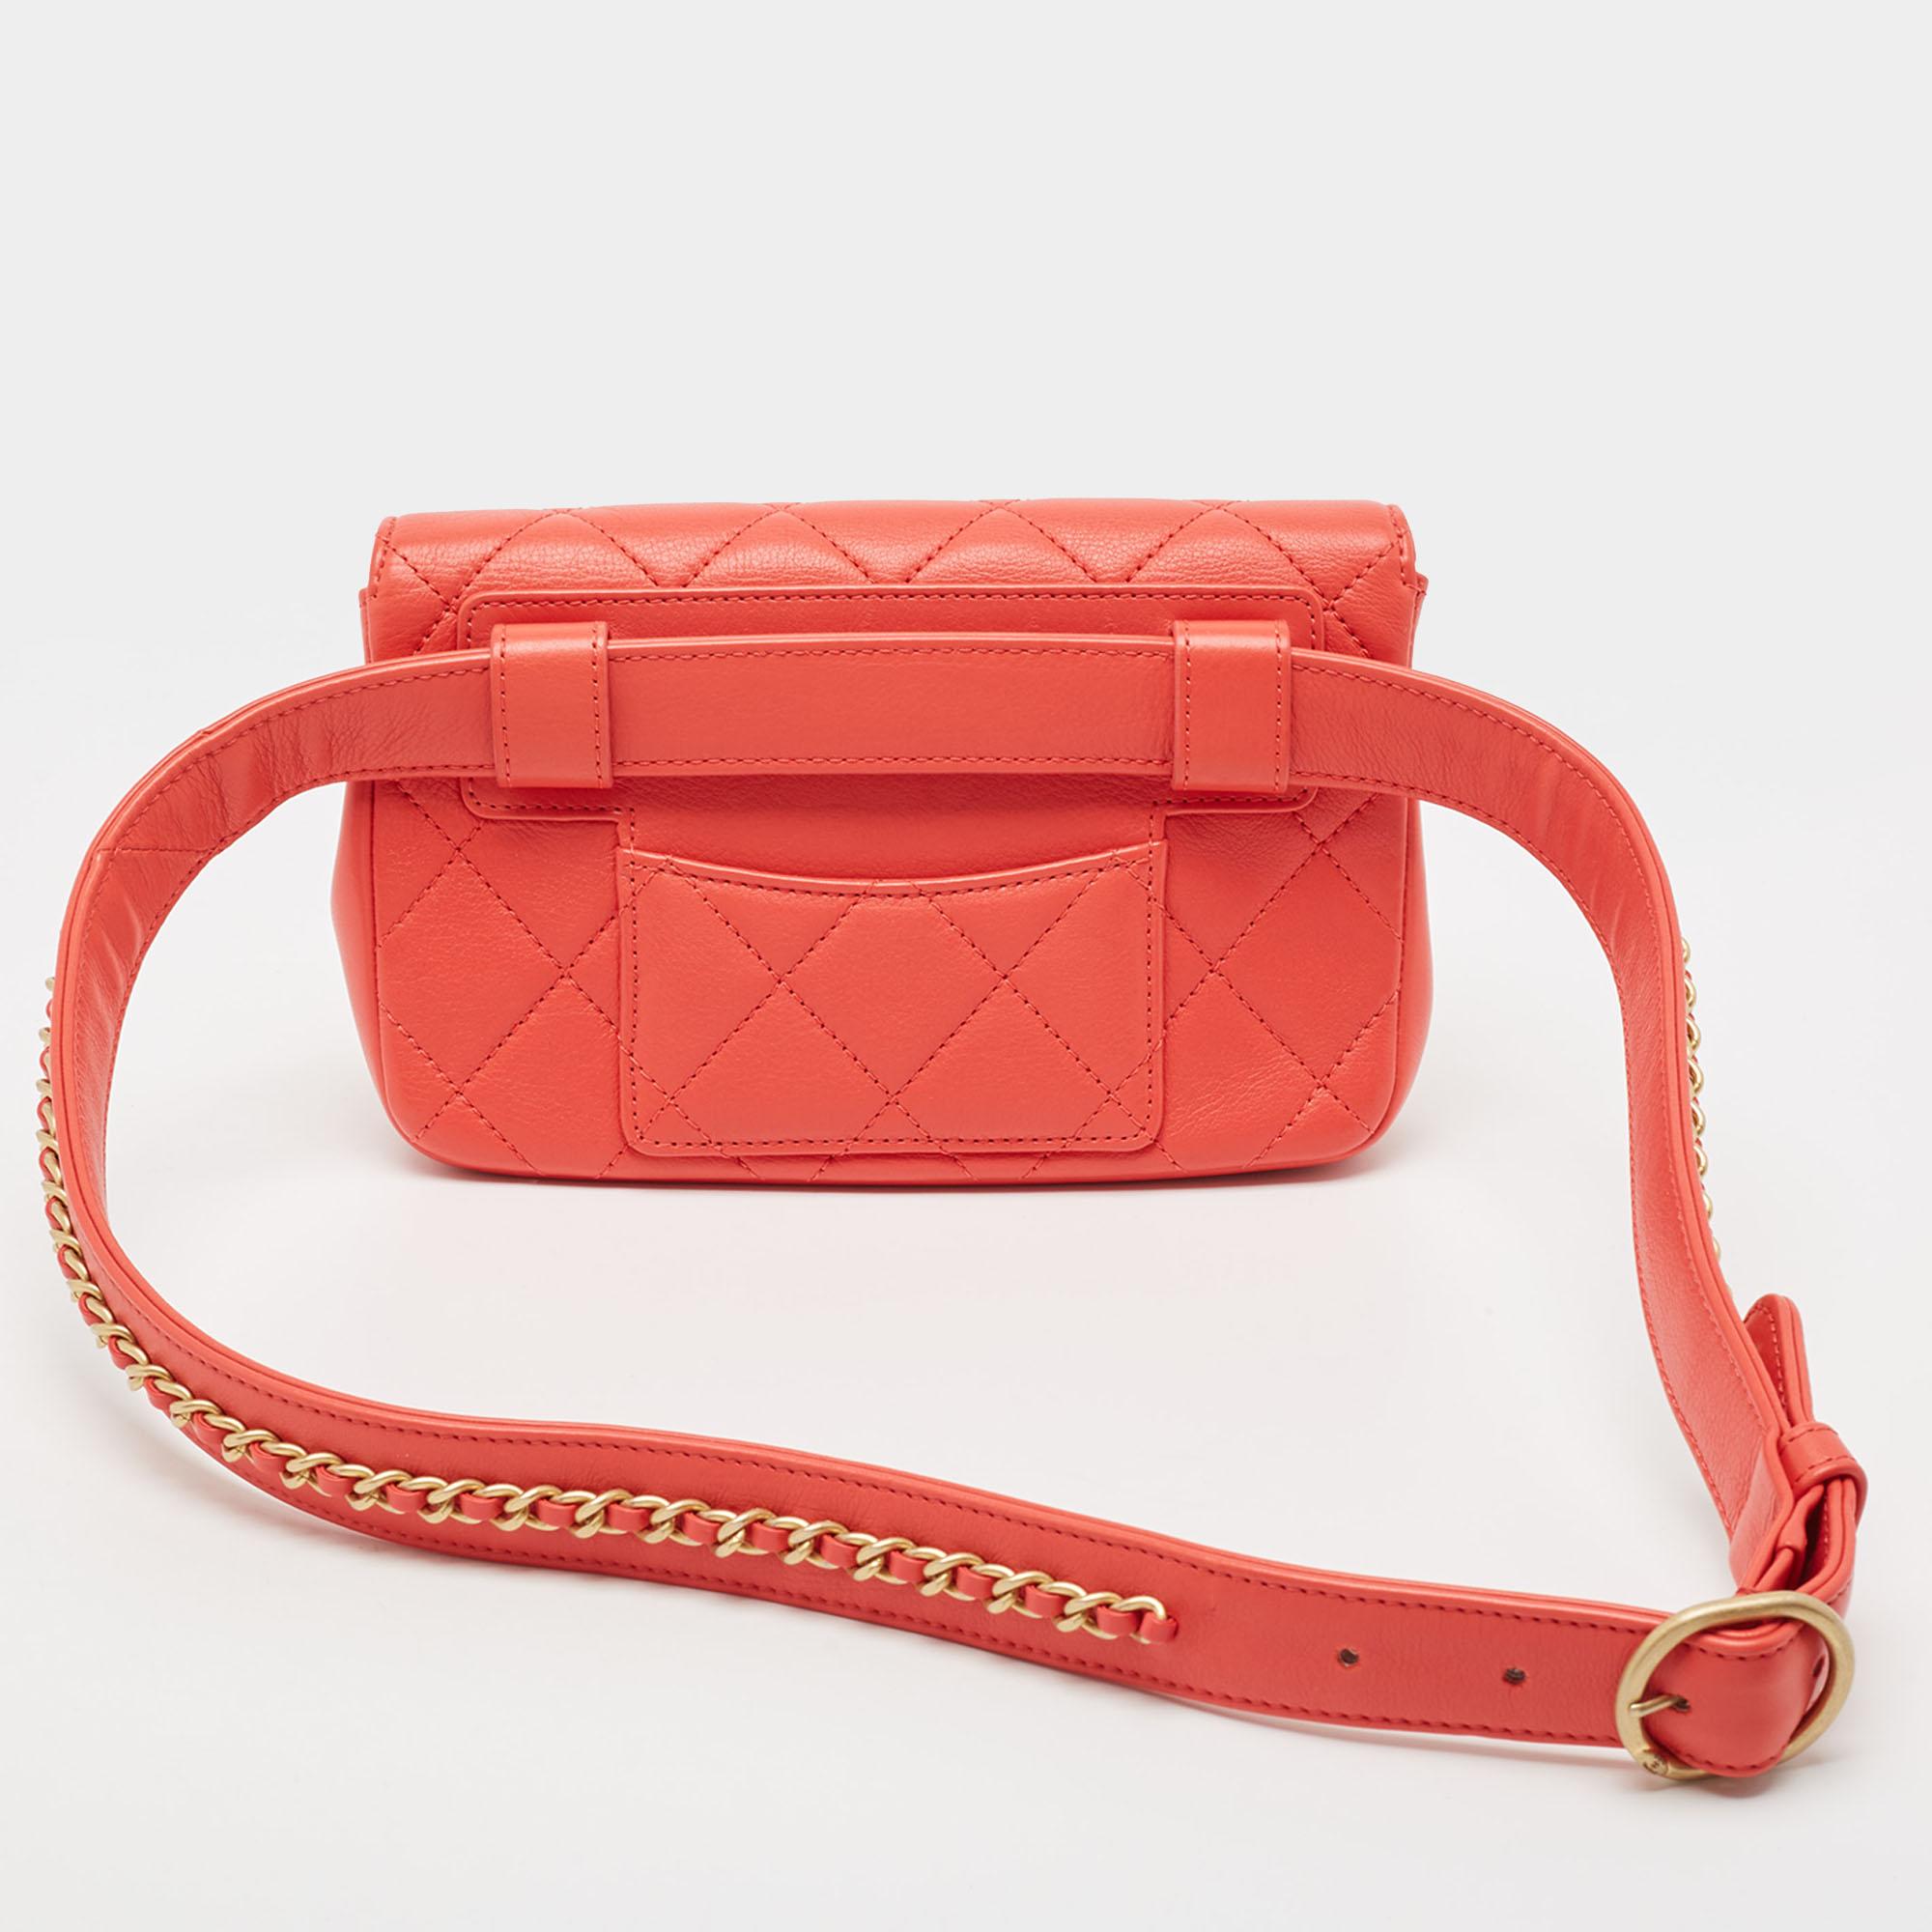 Chanel Red Quilted Leather CC Waist Belt Bag 2